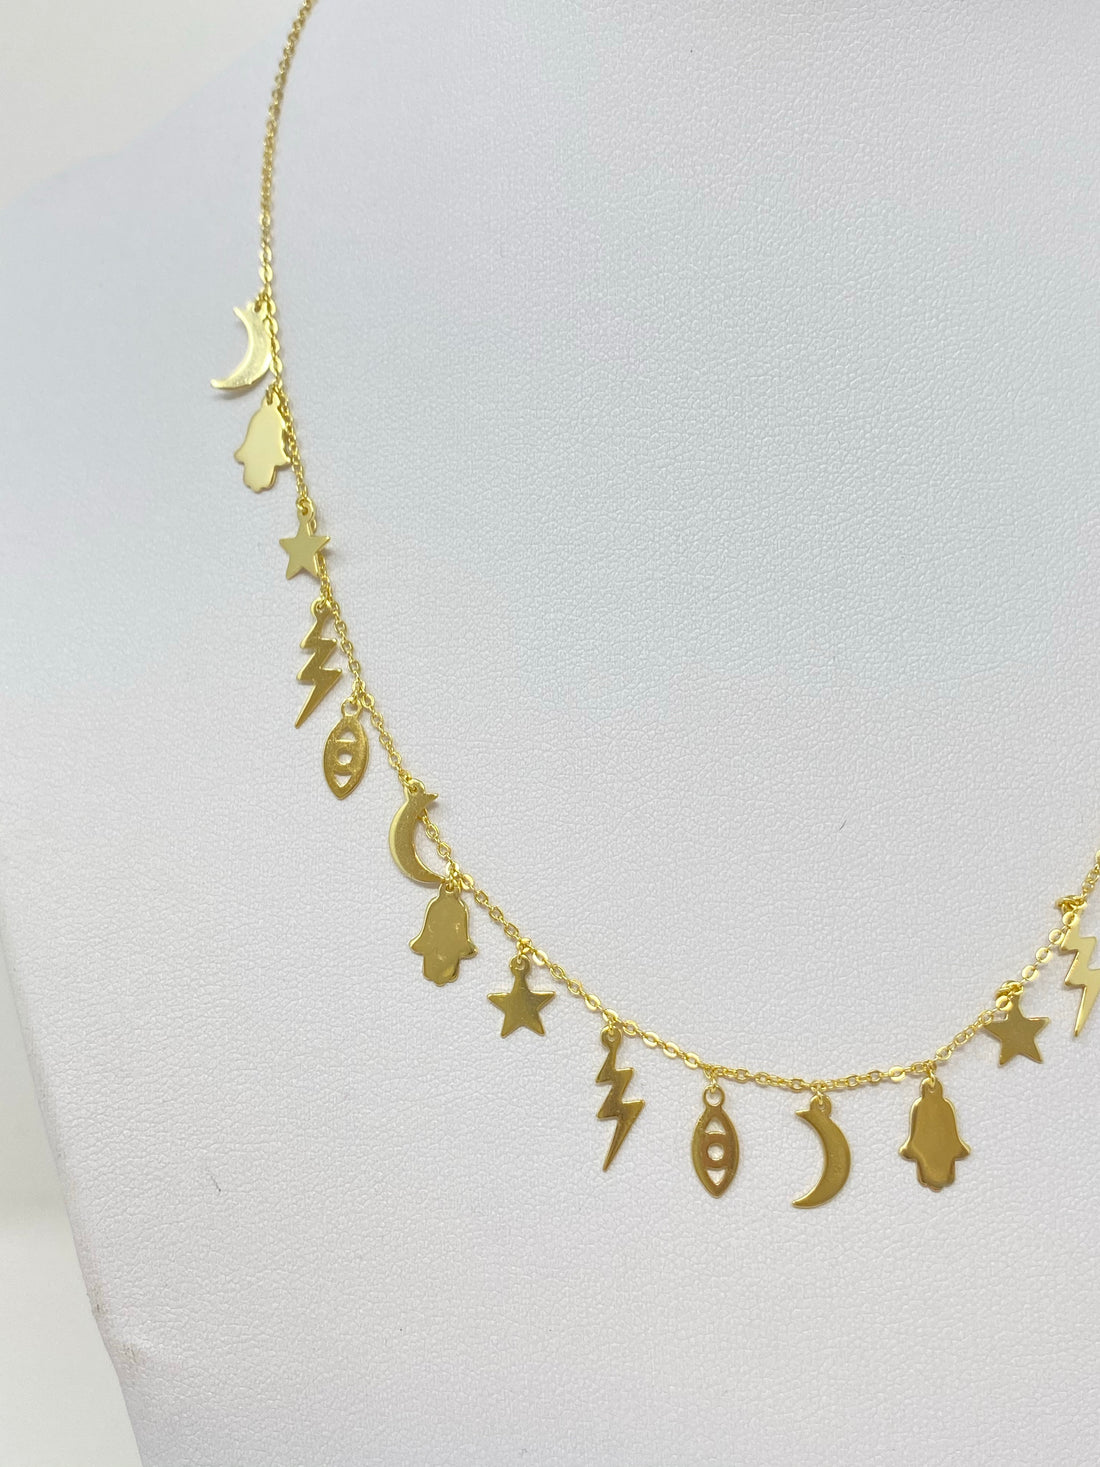 Multi-Charm Necklace in Gold